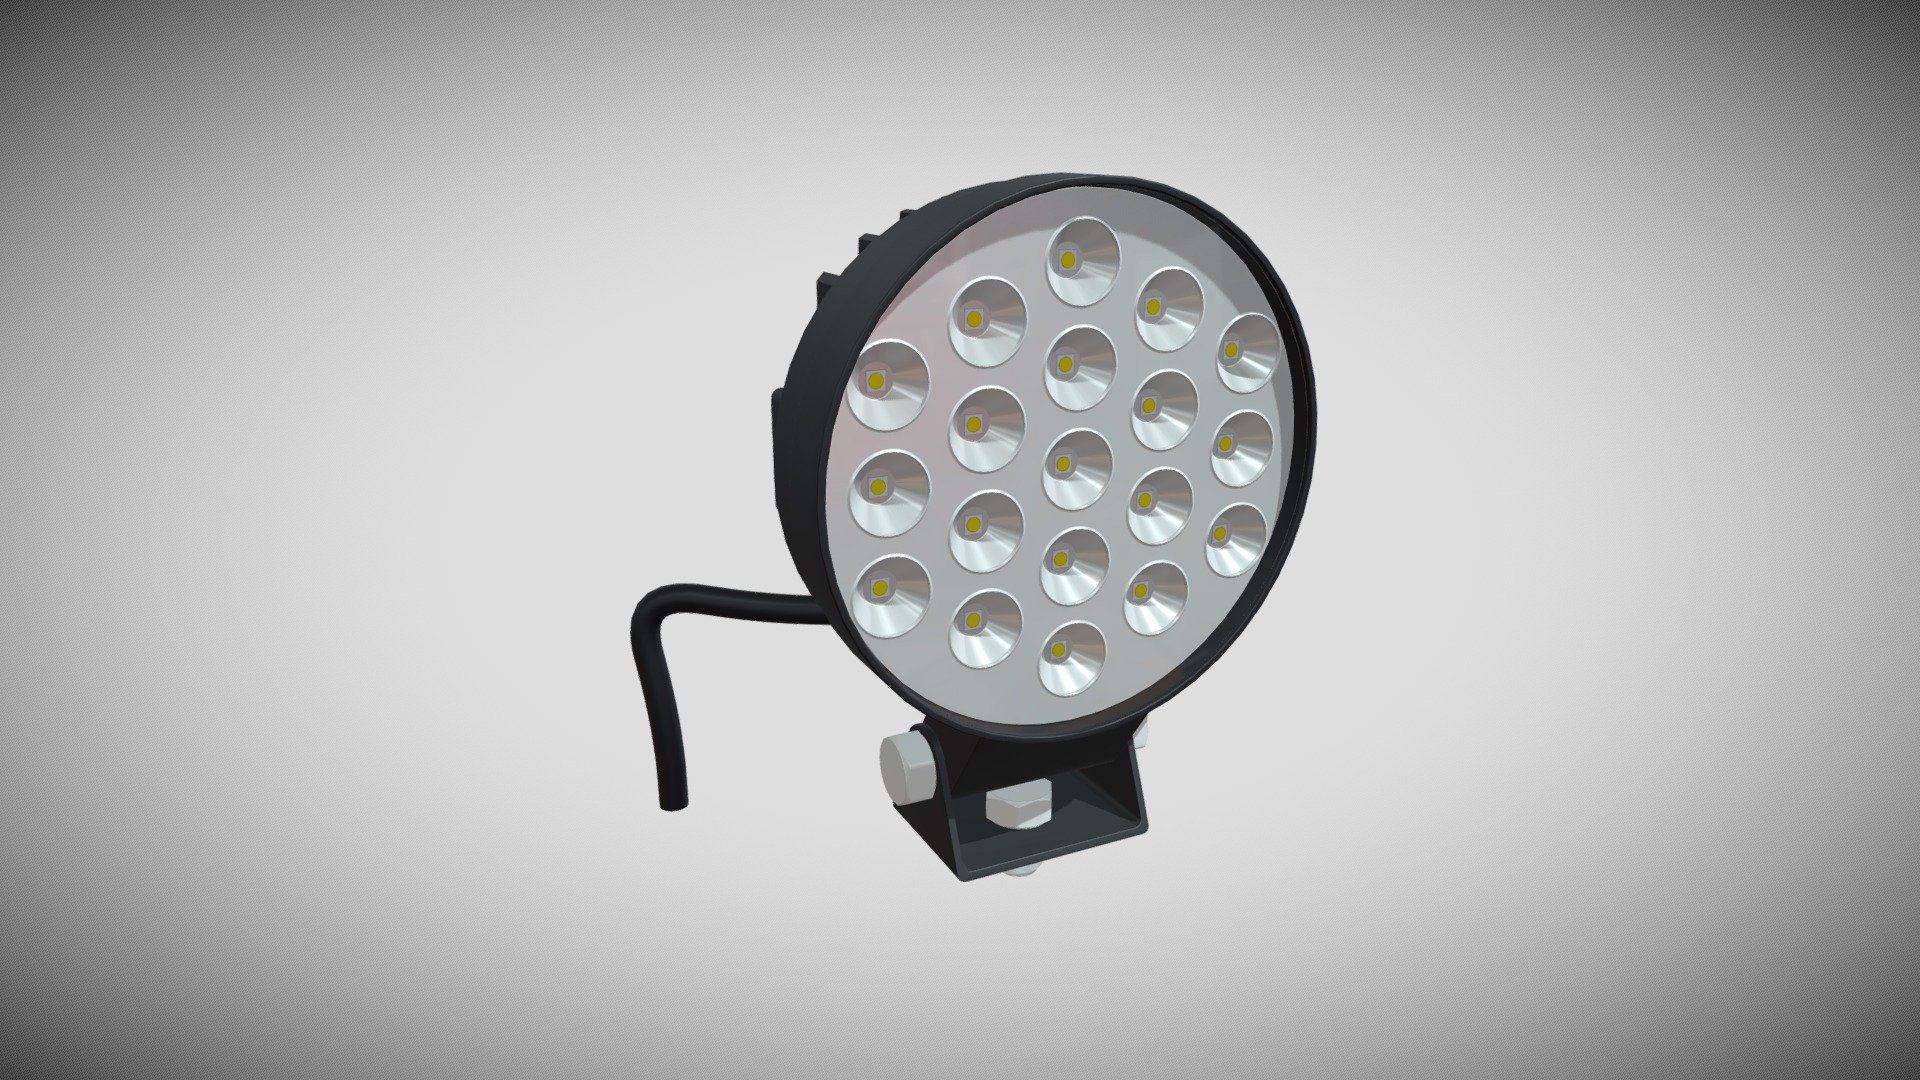 Detailed model of a Circular LED Light Bar, modeled in Cinema 4D.The model was created using approximate real world dimensions.

The model has 31,498 polys and 31,555 vertices.

An additional file has been provided containing the original Cinema 4D project files with both standard and v-ray materials and other 3d export files such as 3ds, fbx and obj 3d model